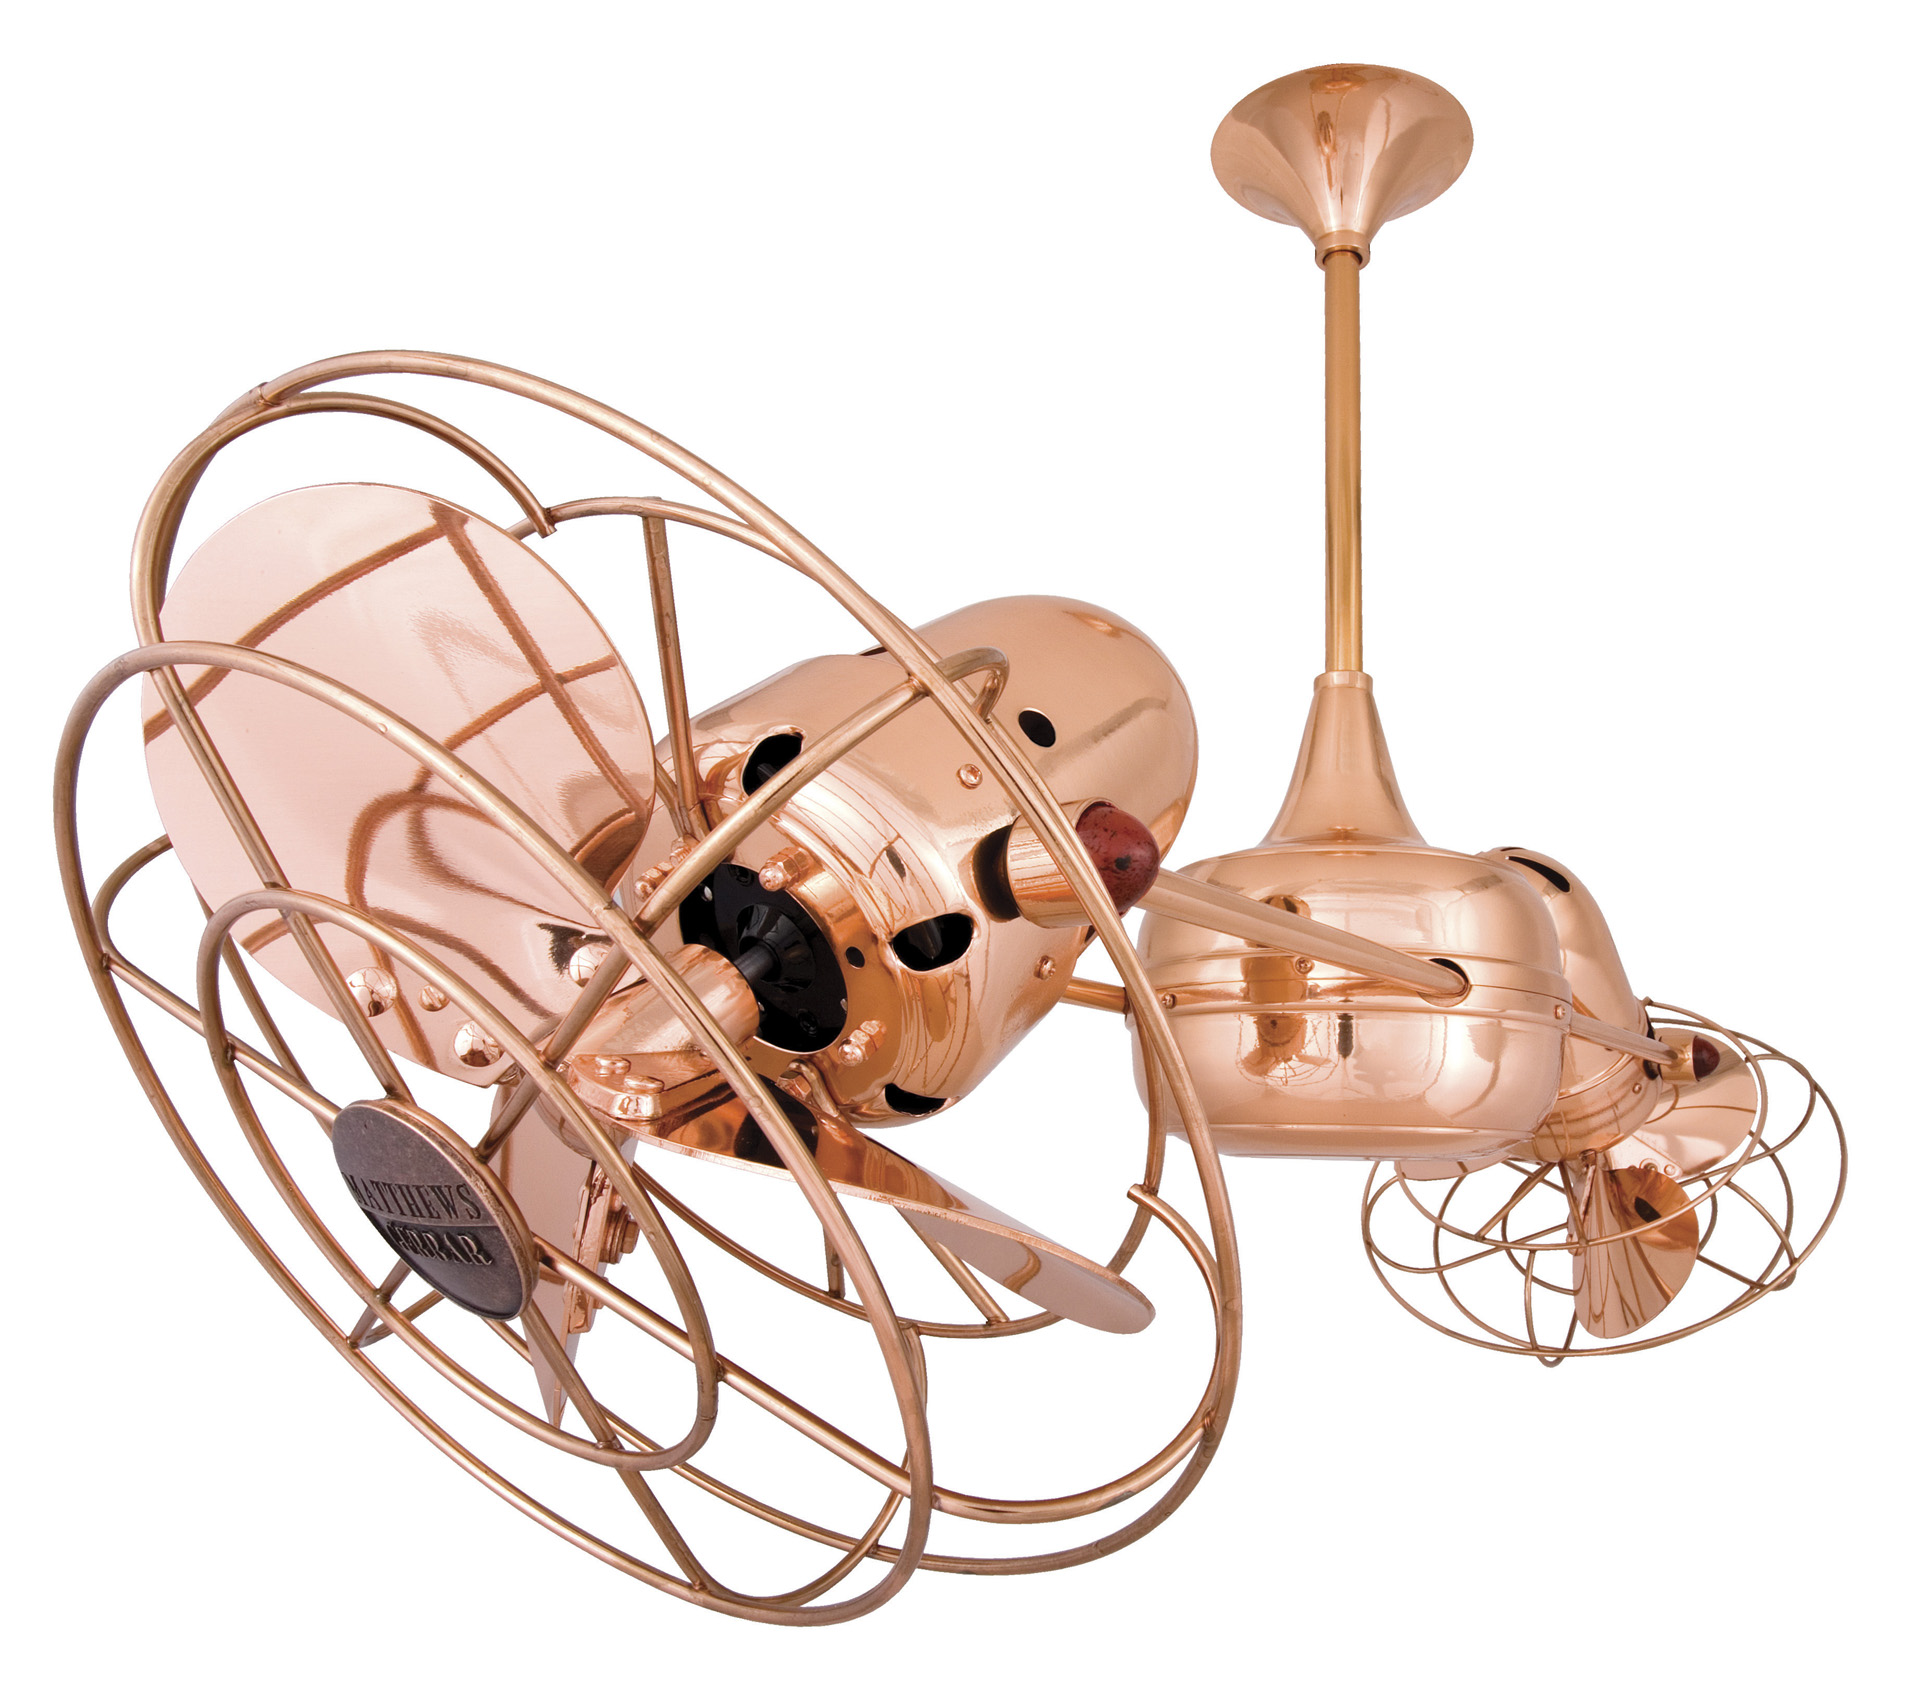 Duplo Dinamico Rotational Dual Fead Ceiling Fan in Polished Copper Finish with Metal Blades